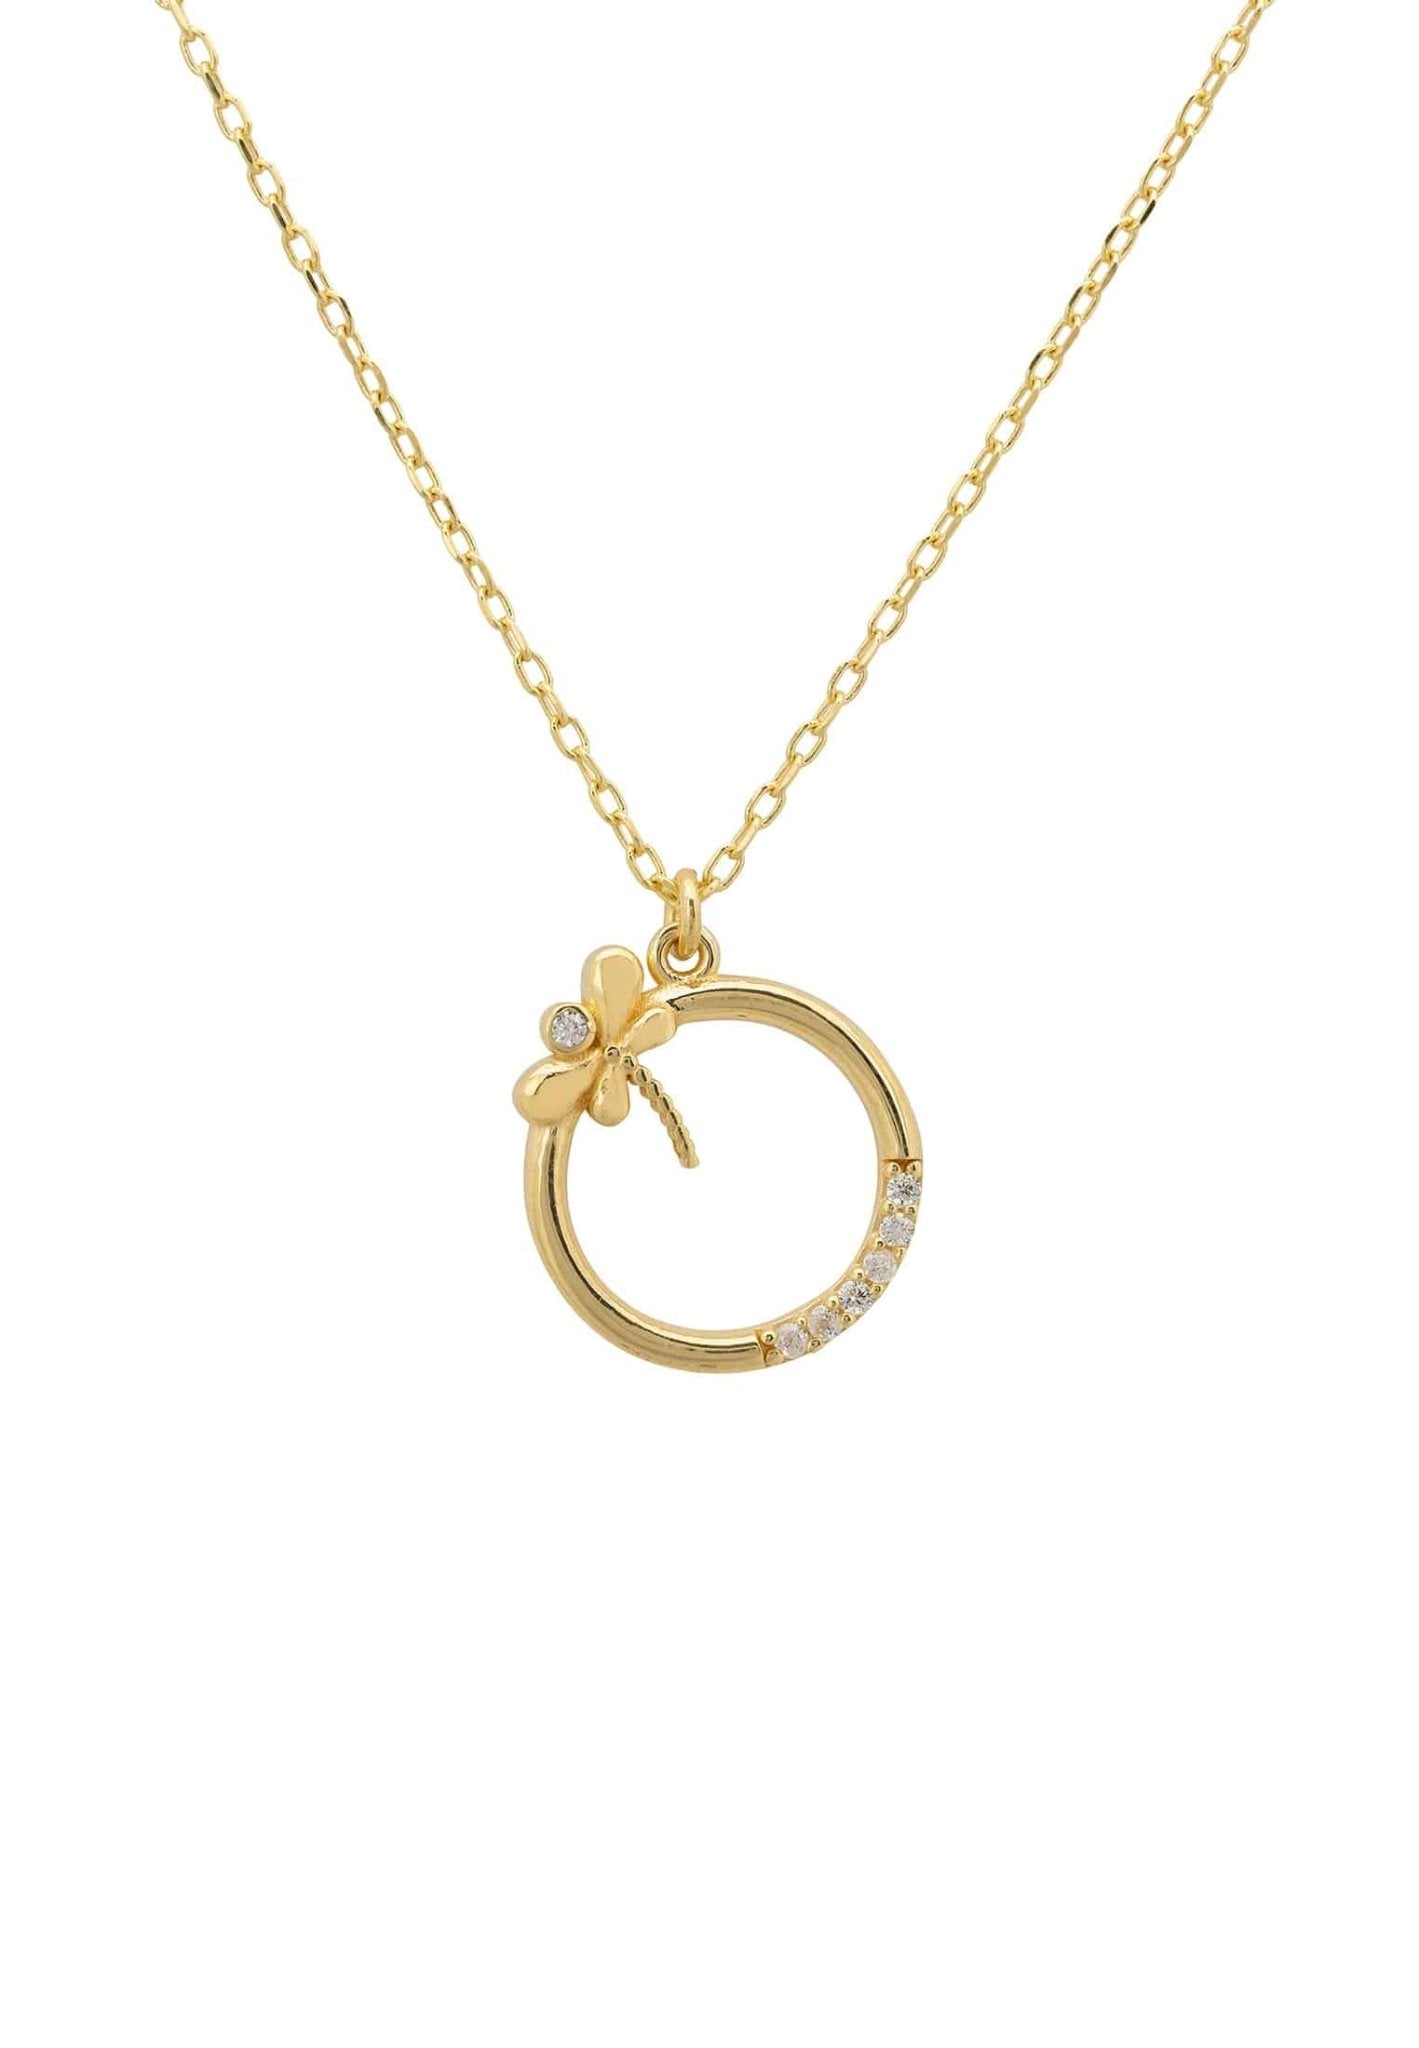 Dragonfly Halo Necklace Gold - LATELITA Necklaces